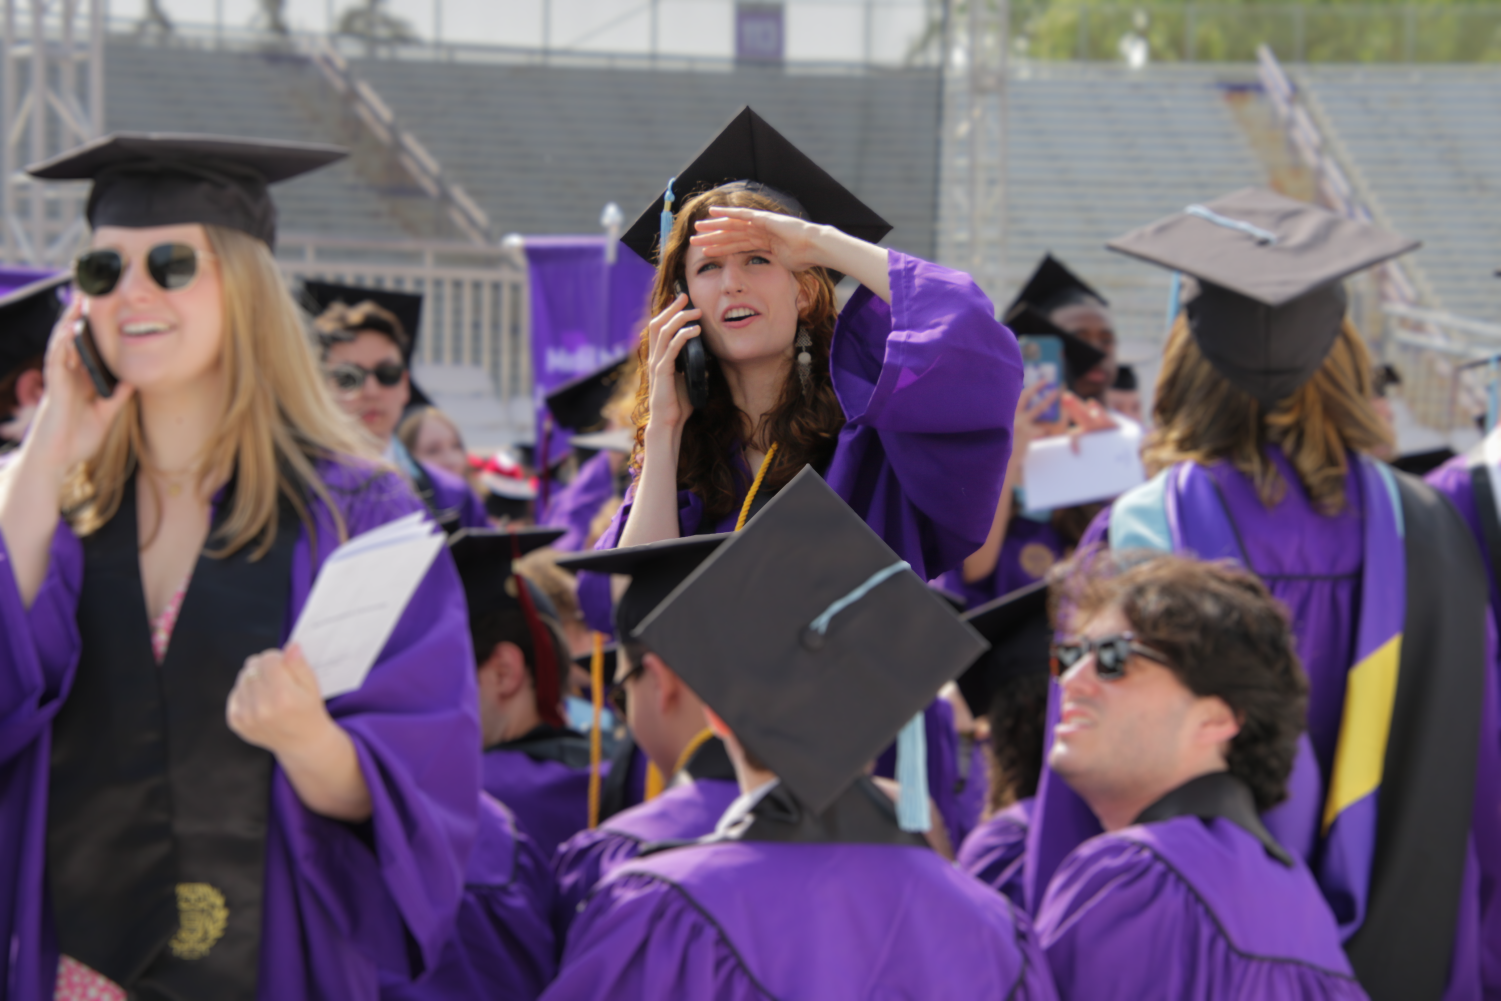 A person in a cap and gown looks to the crowd as they hold their cell phone in the other hand.